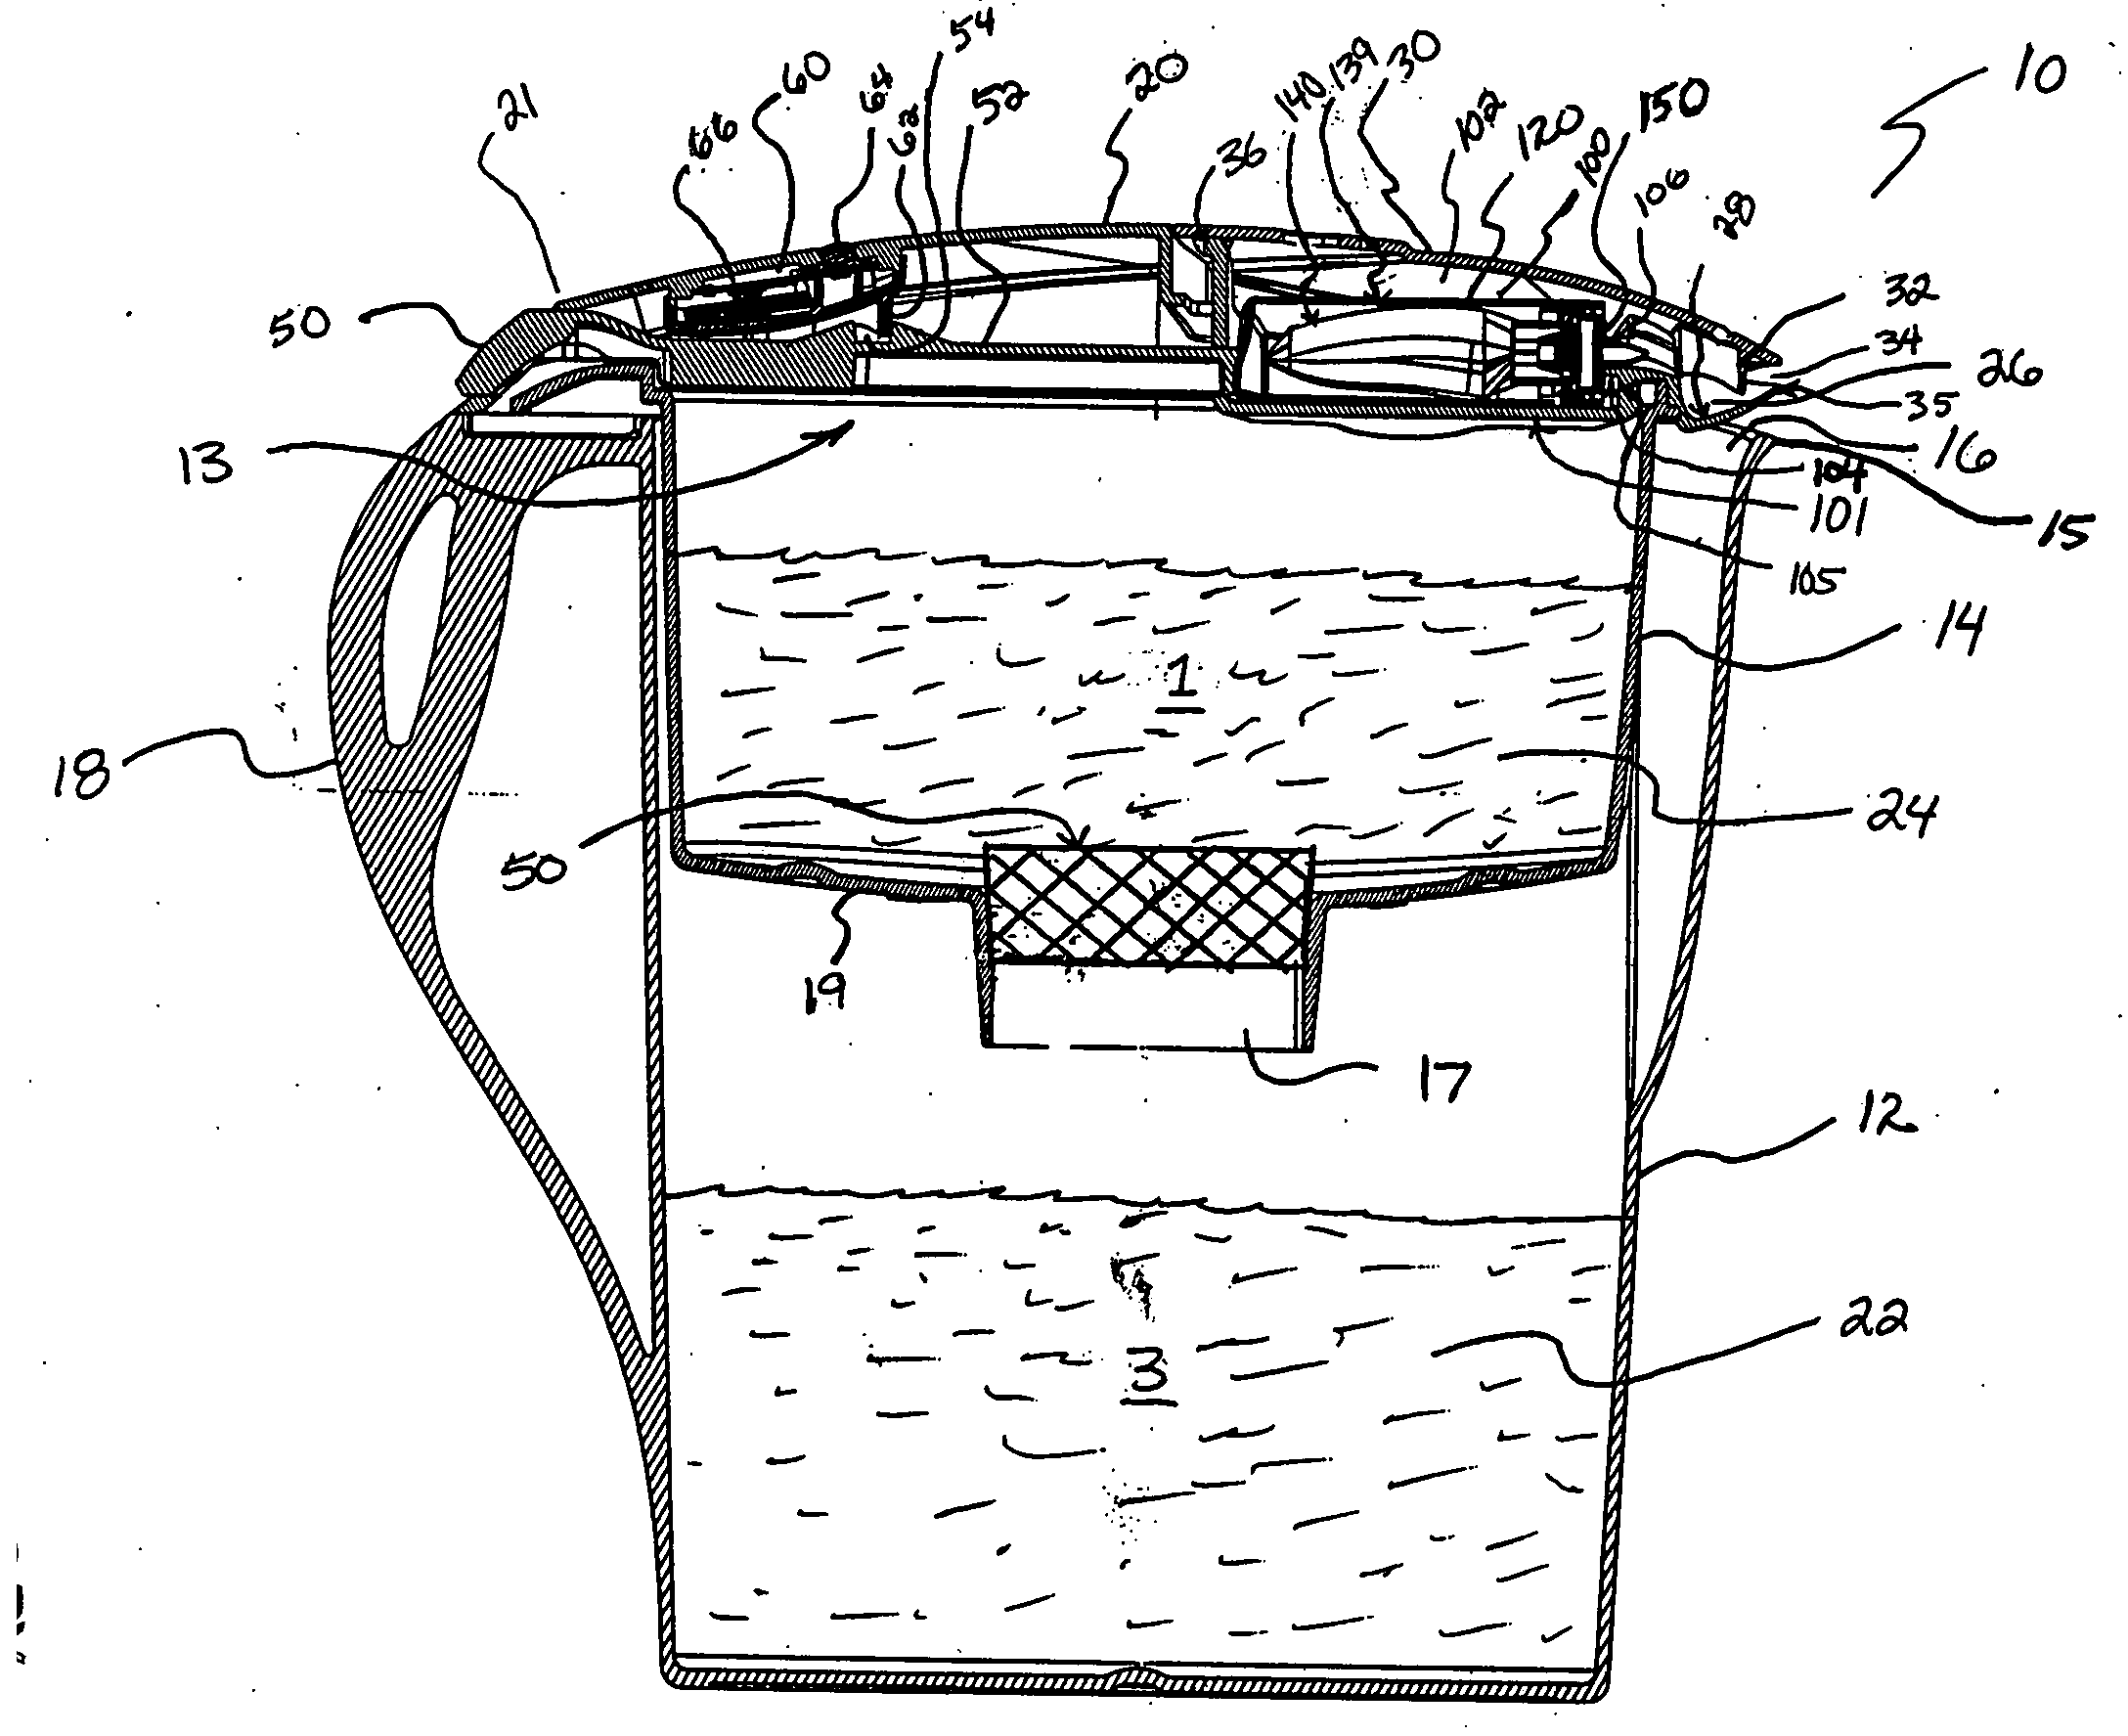 Fluid container having an additive dispensing system